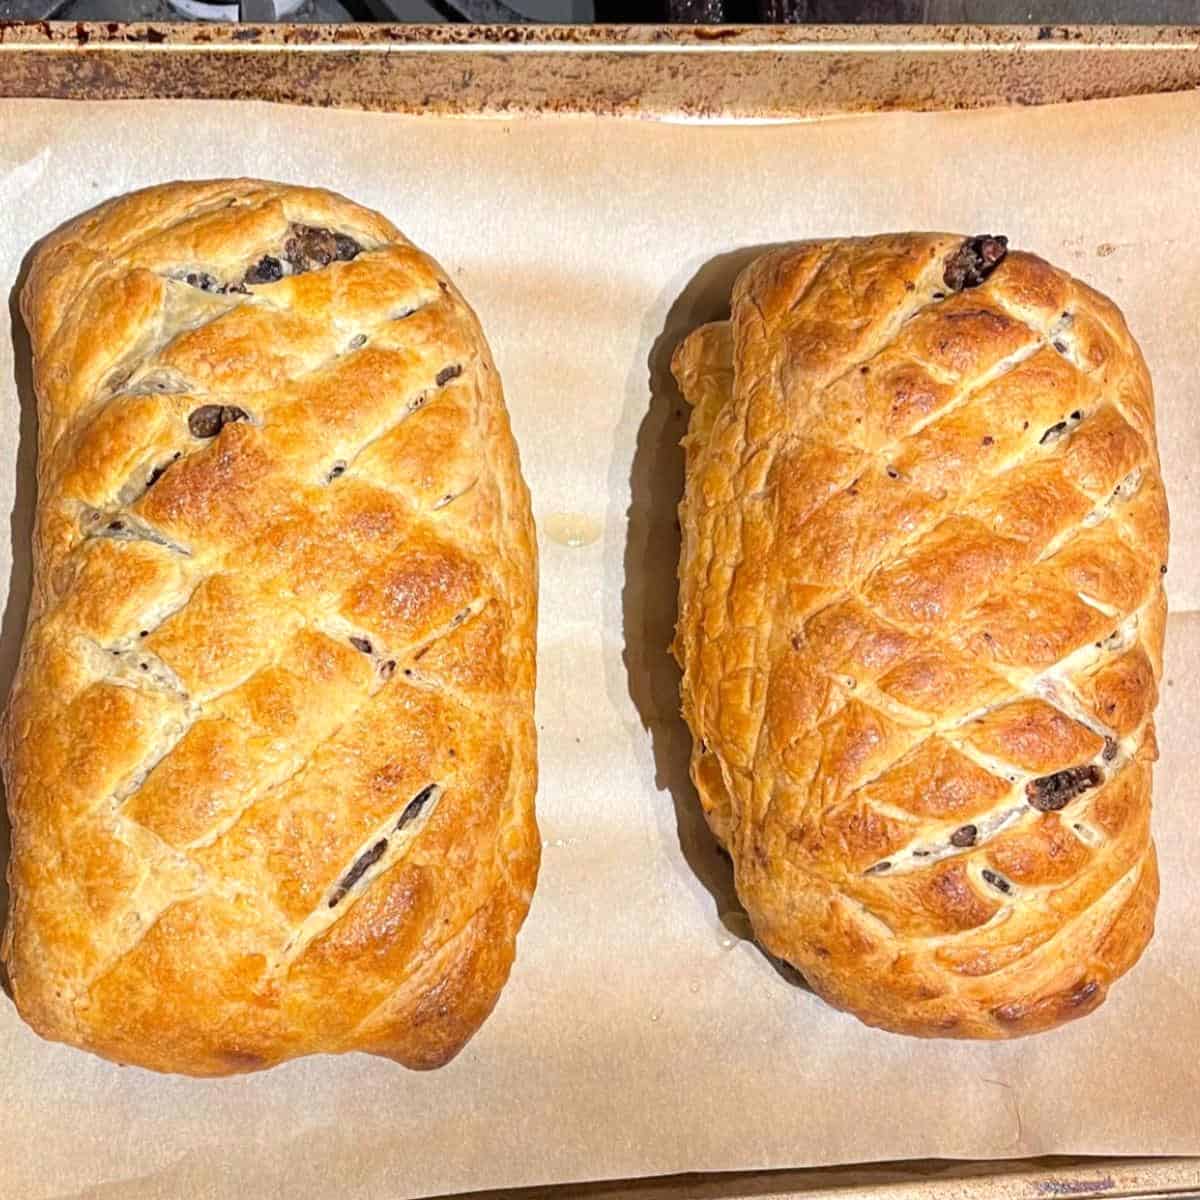 Baked wellington loaves on parchment lined baking sheet.